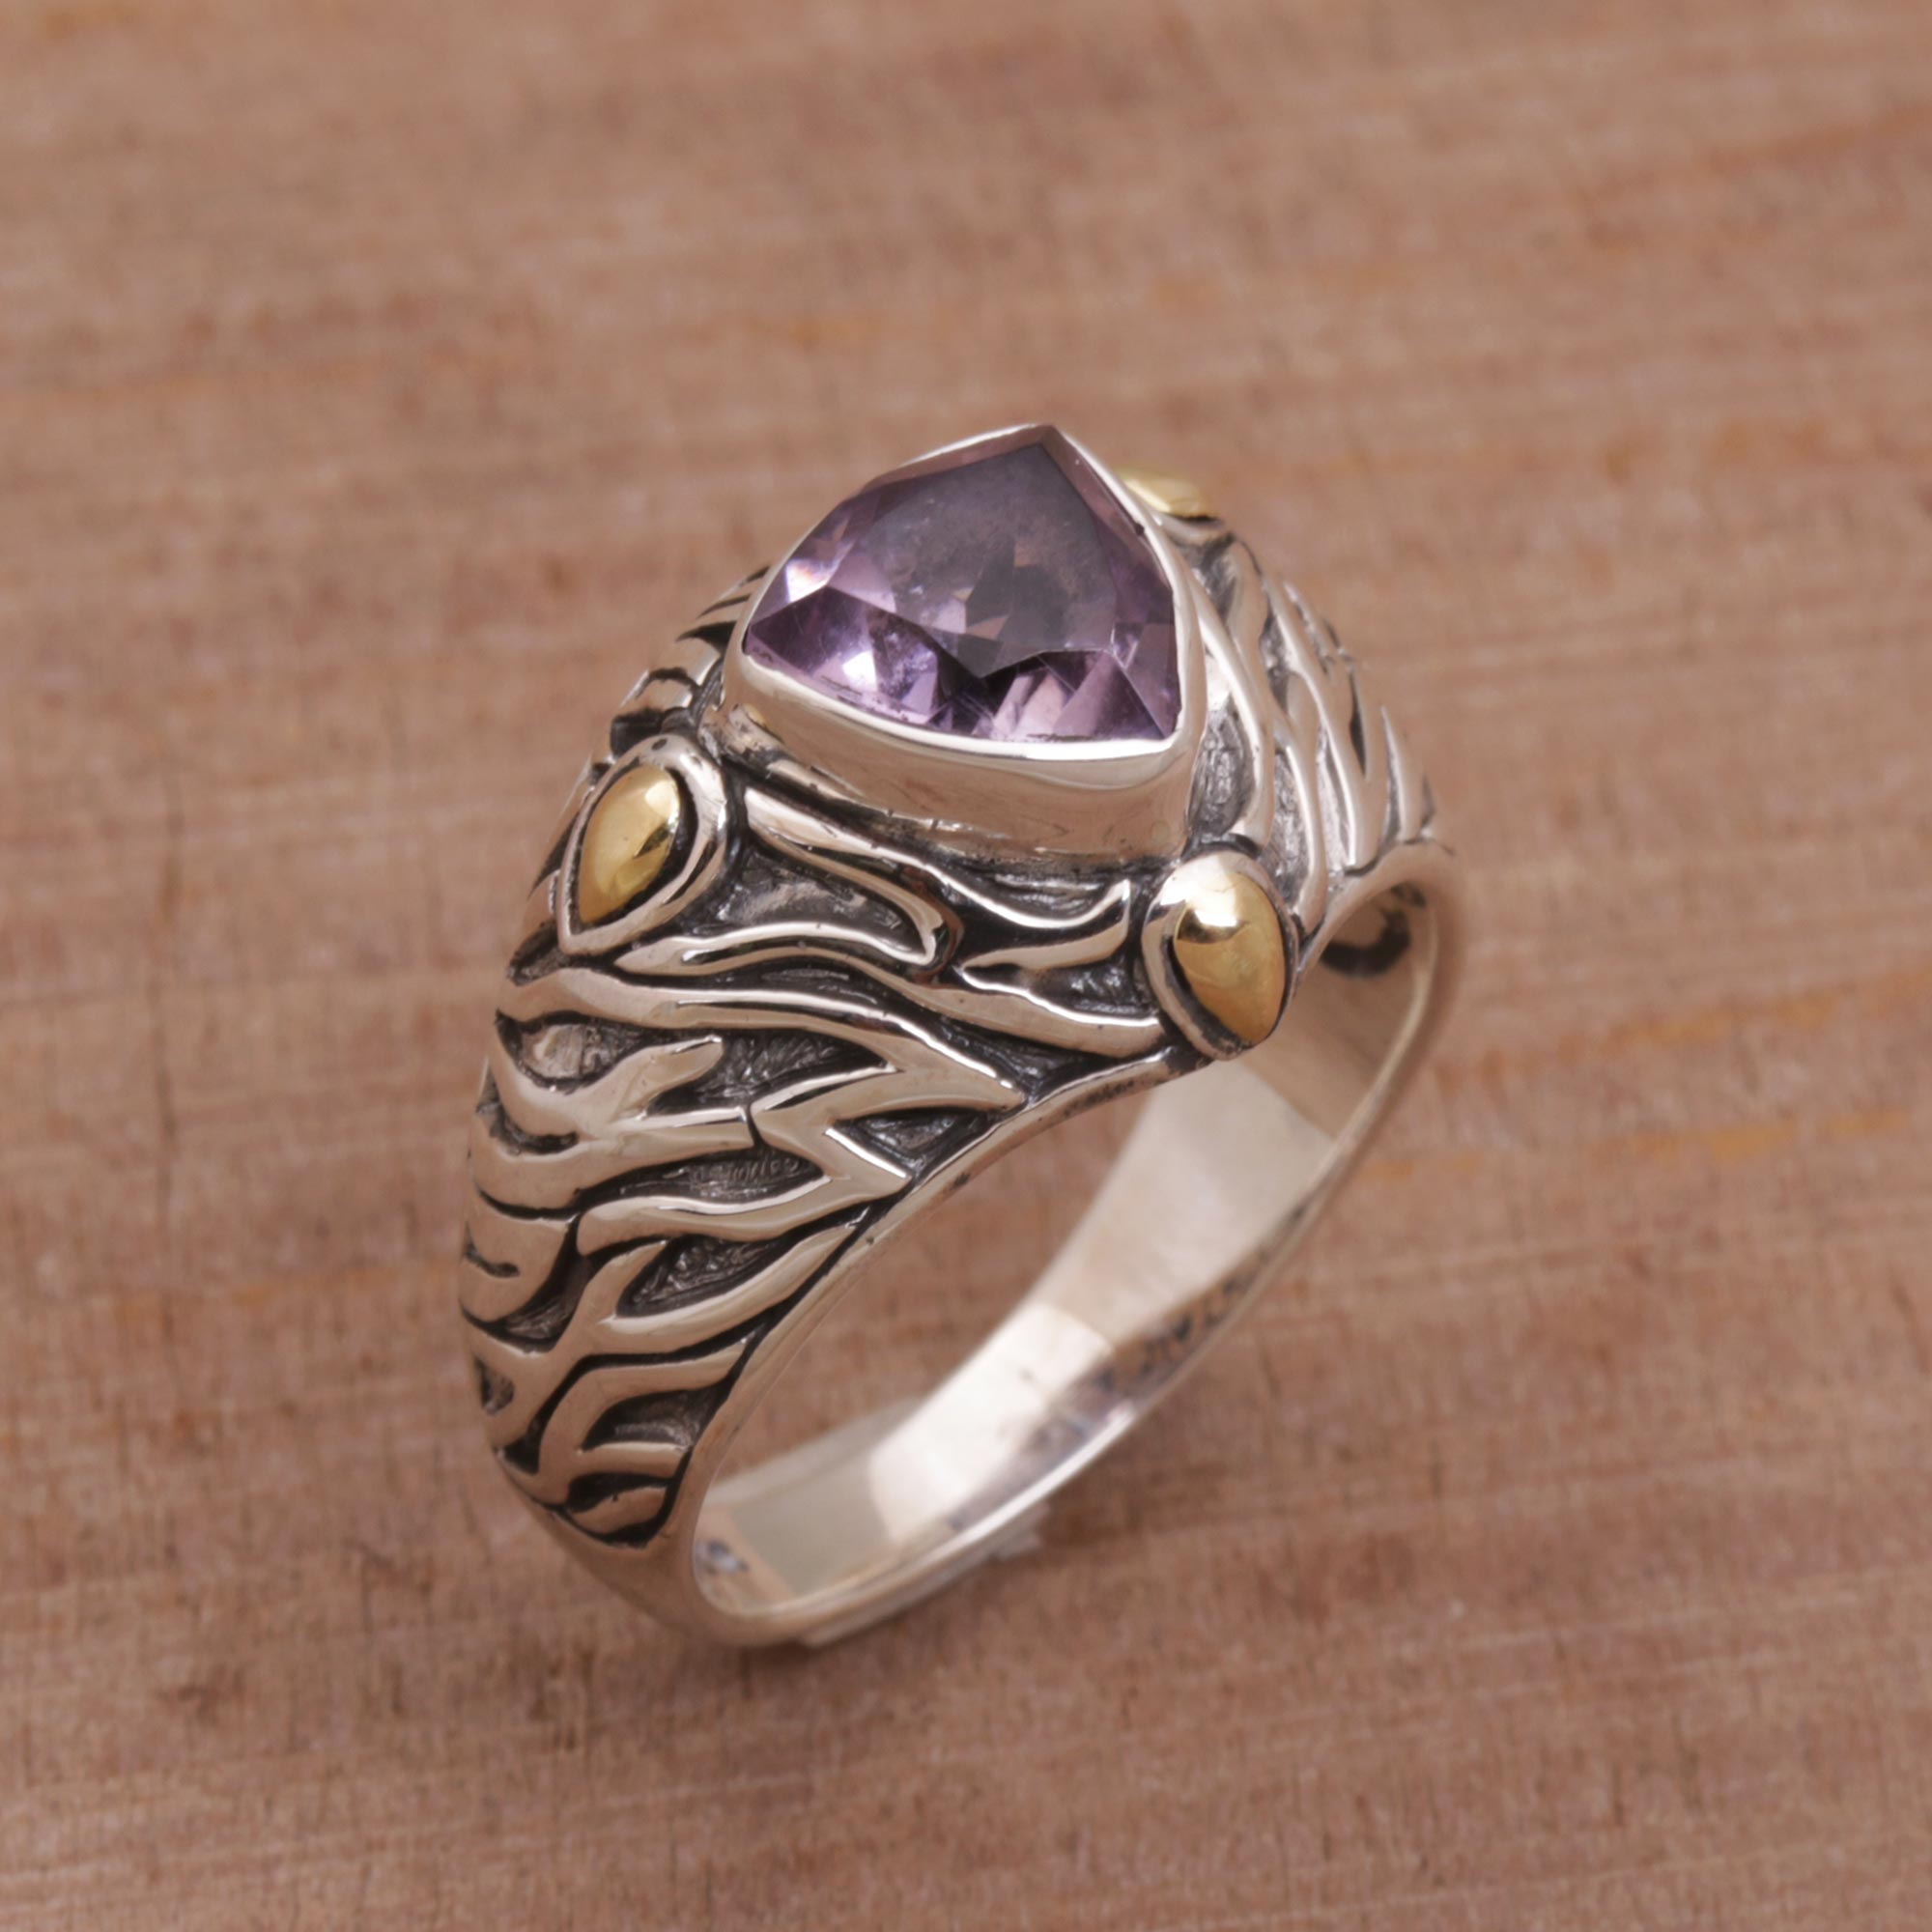 Top Quality Amethyst Ring 6 Vintage Amethyst Ring* Amethyst Gemstone Ring* 925 Sterling Silver Ring* Amethyst Gift For Her Gift For Mother